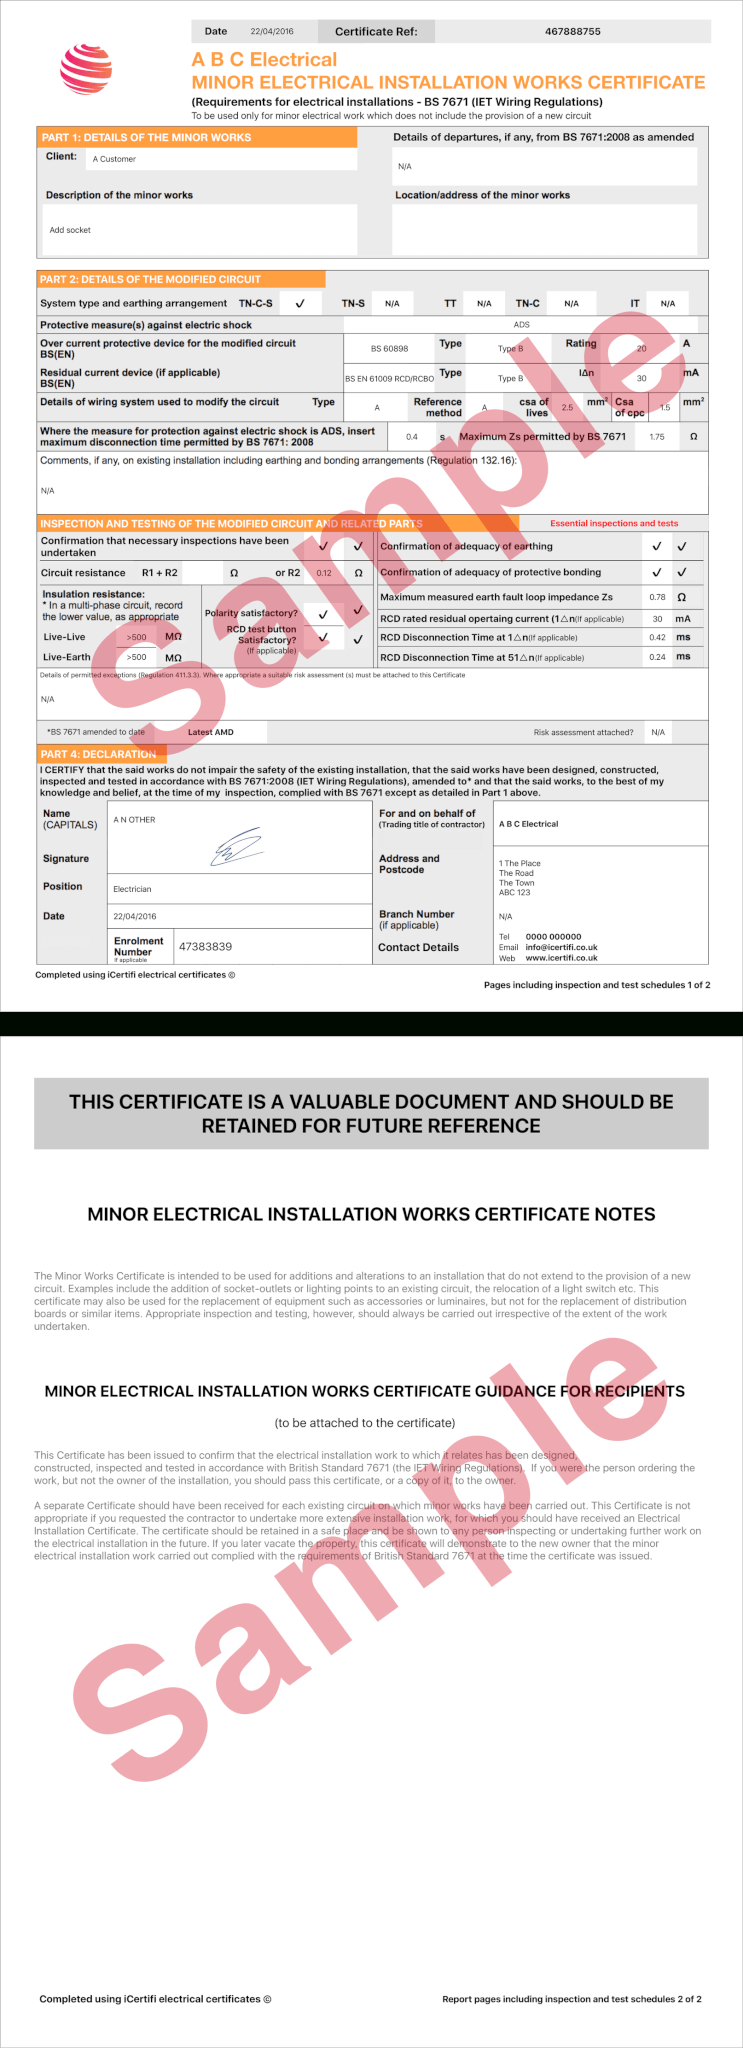 Electrical Certificate – Example Minor Works Certificate Inside Electrical Minor Works Certificate Template